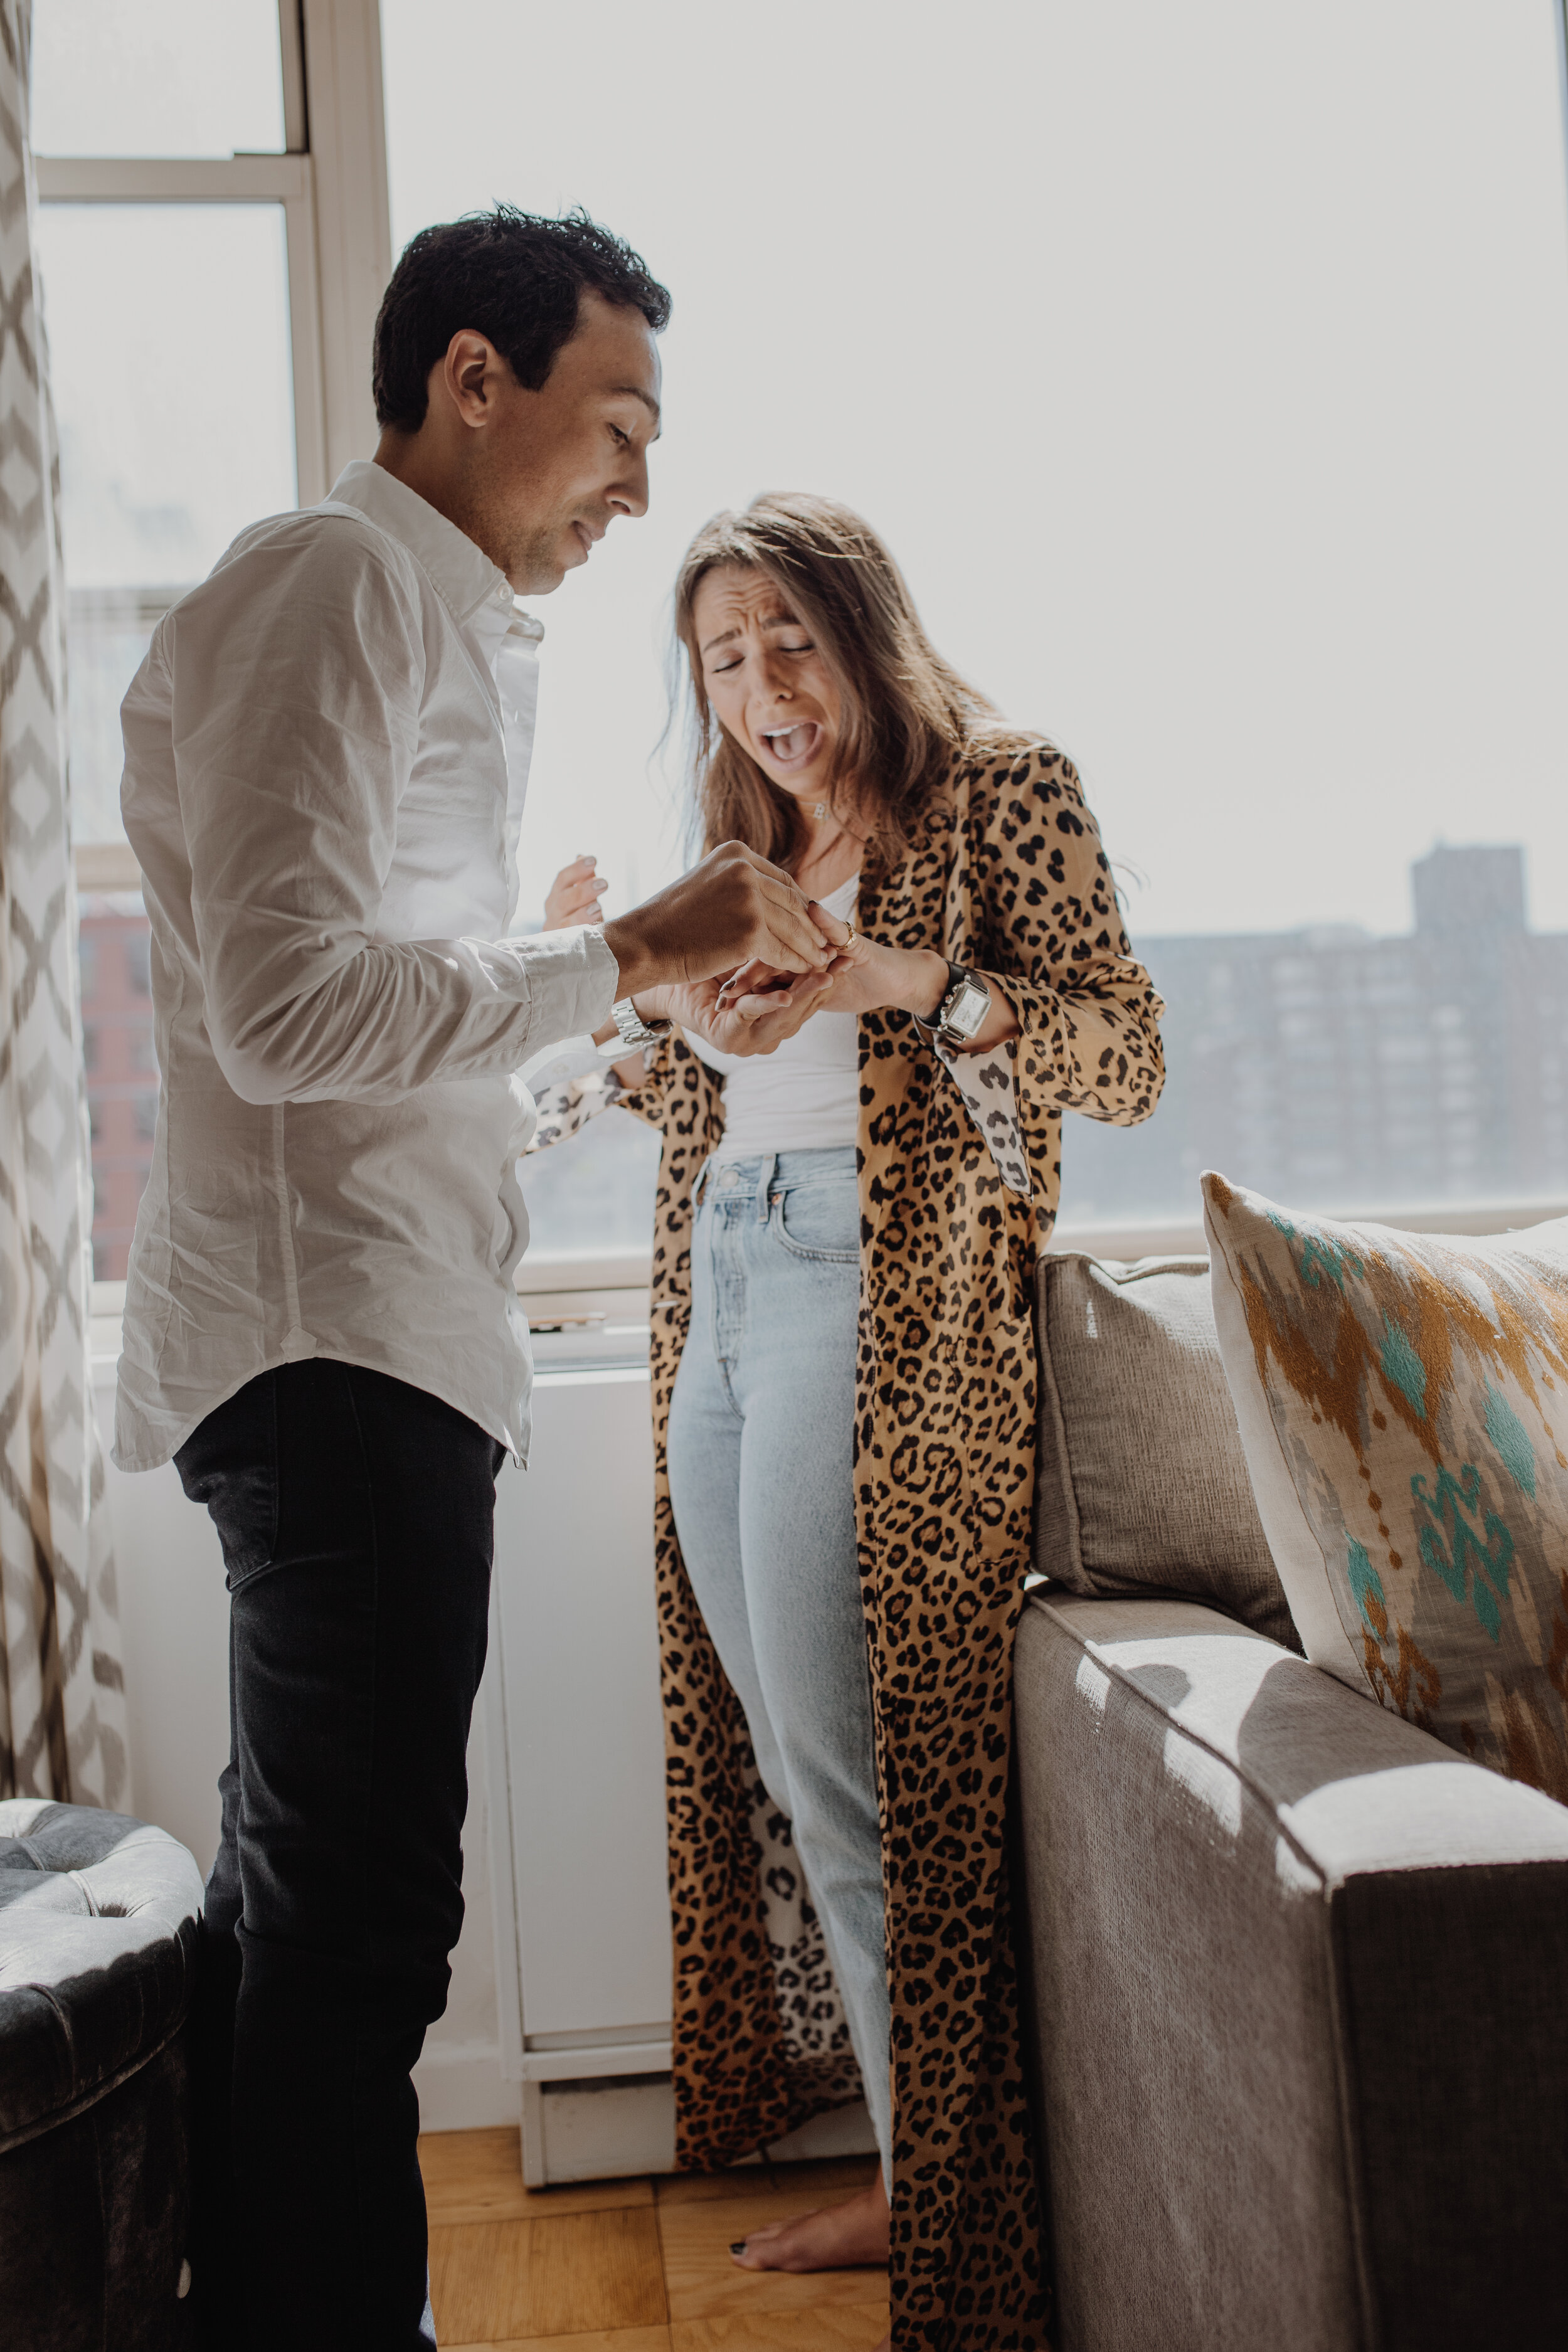 Timeless and Touching Surprise Proposal Photography in NYC